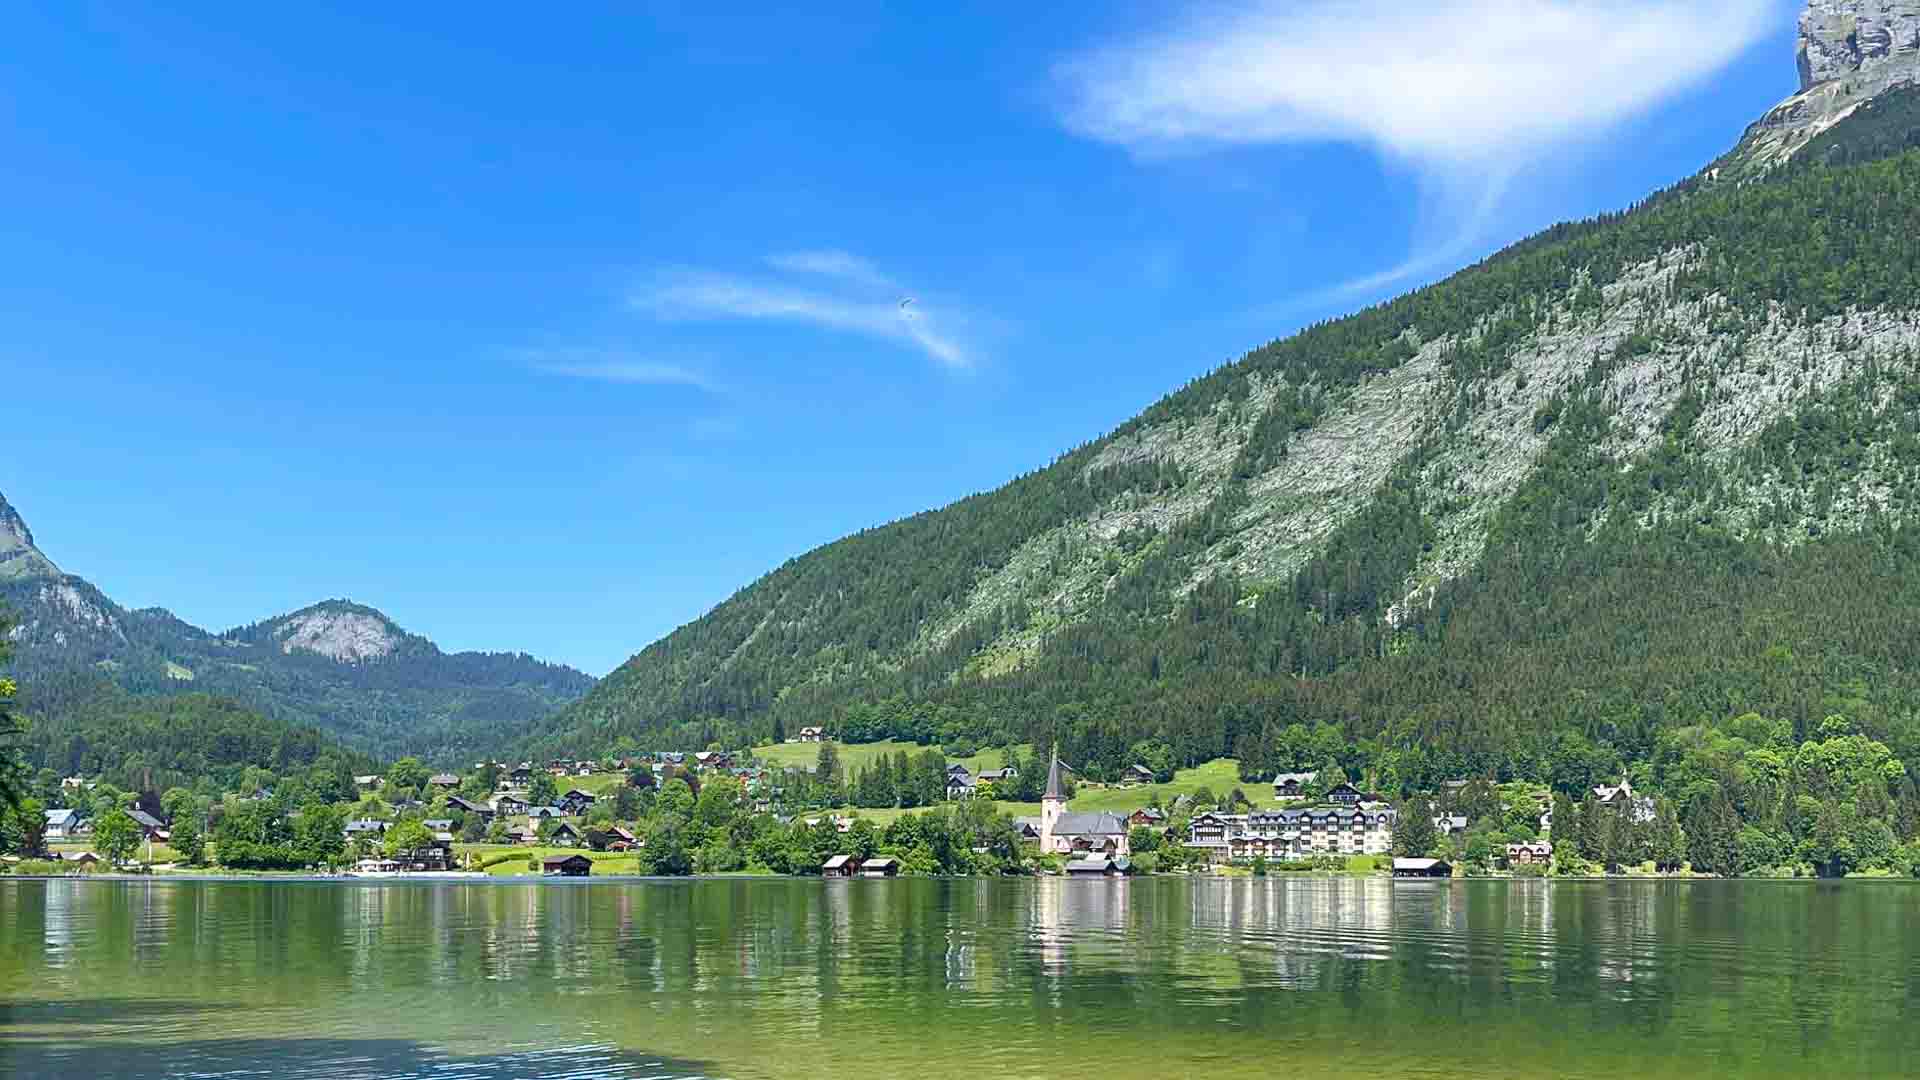 Lake with village and mountains in Austria